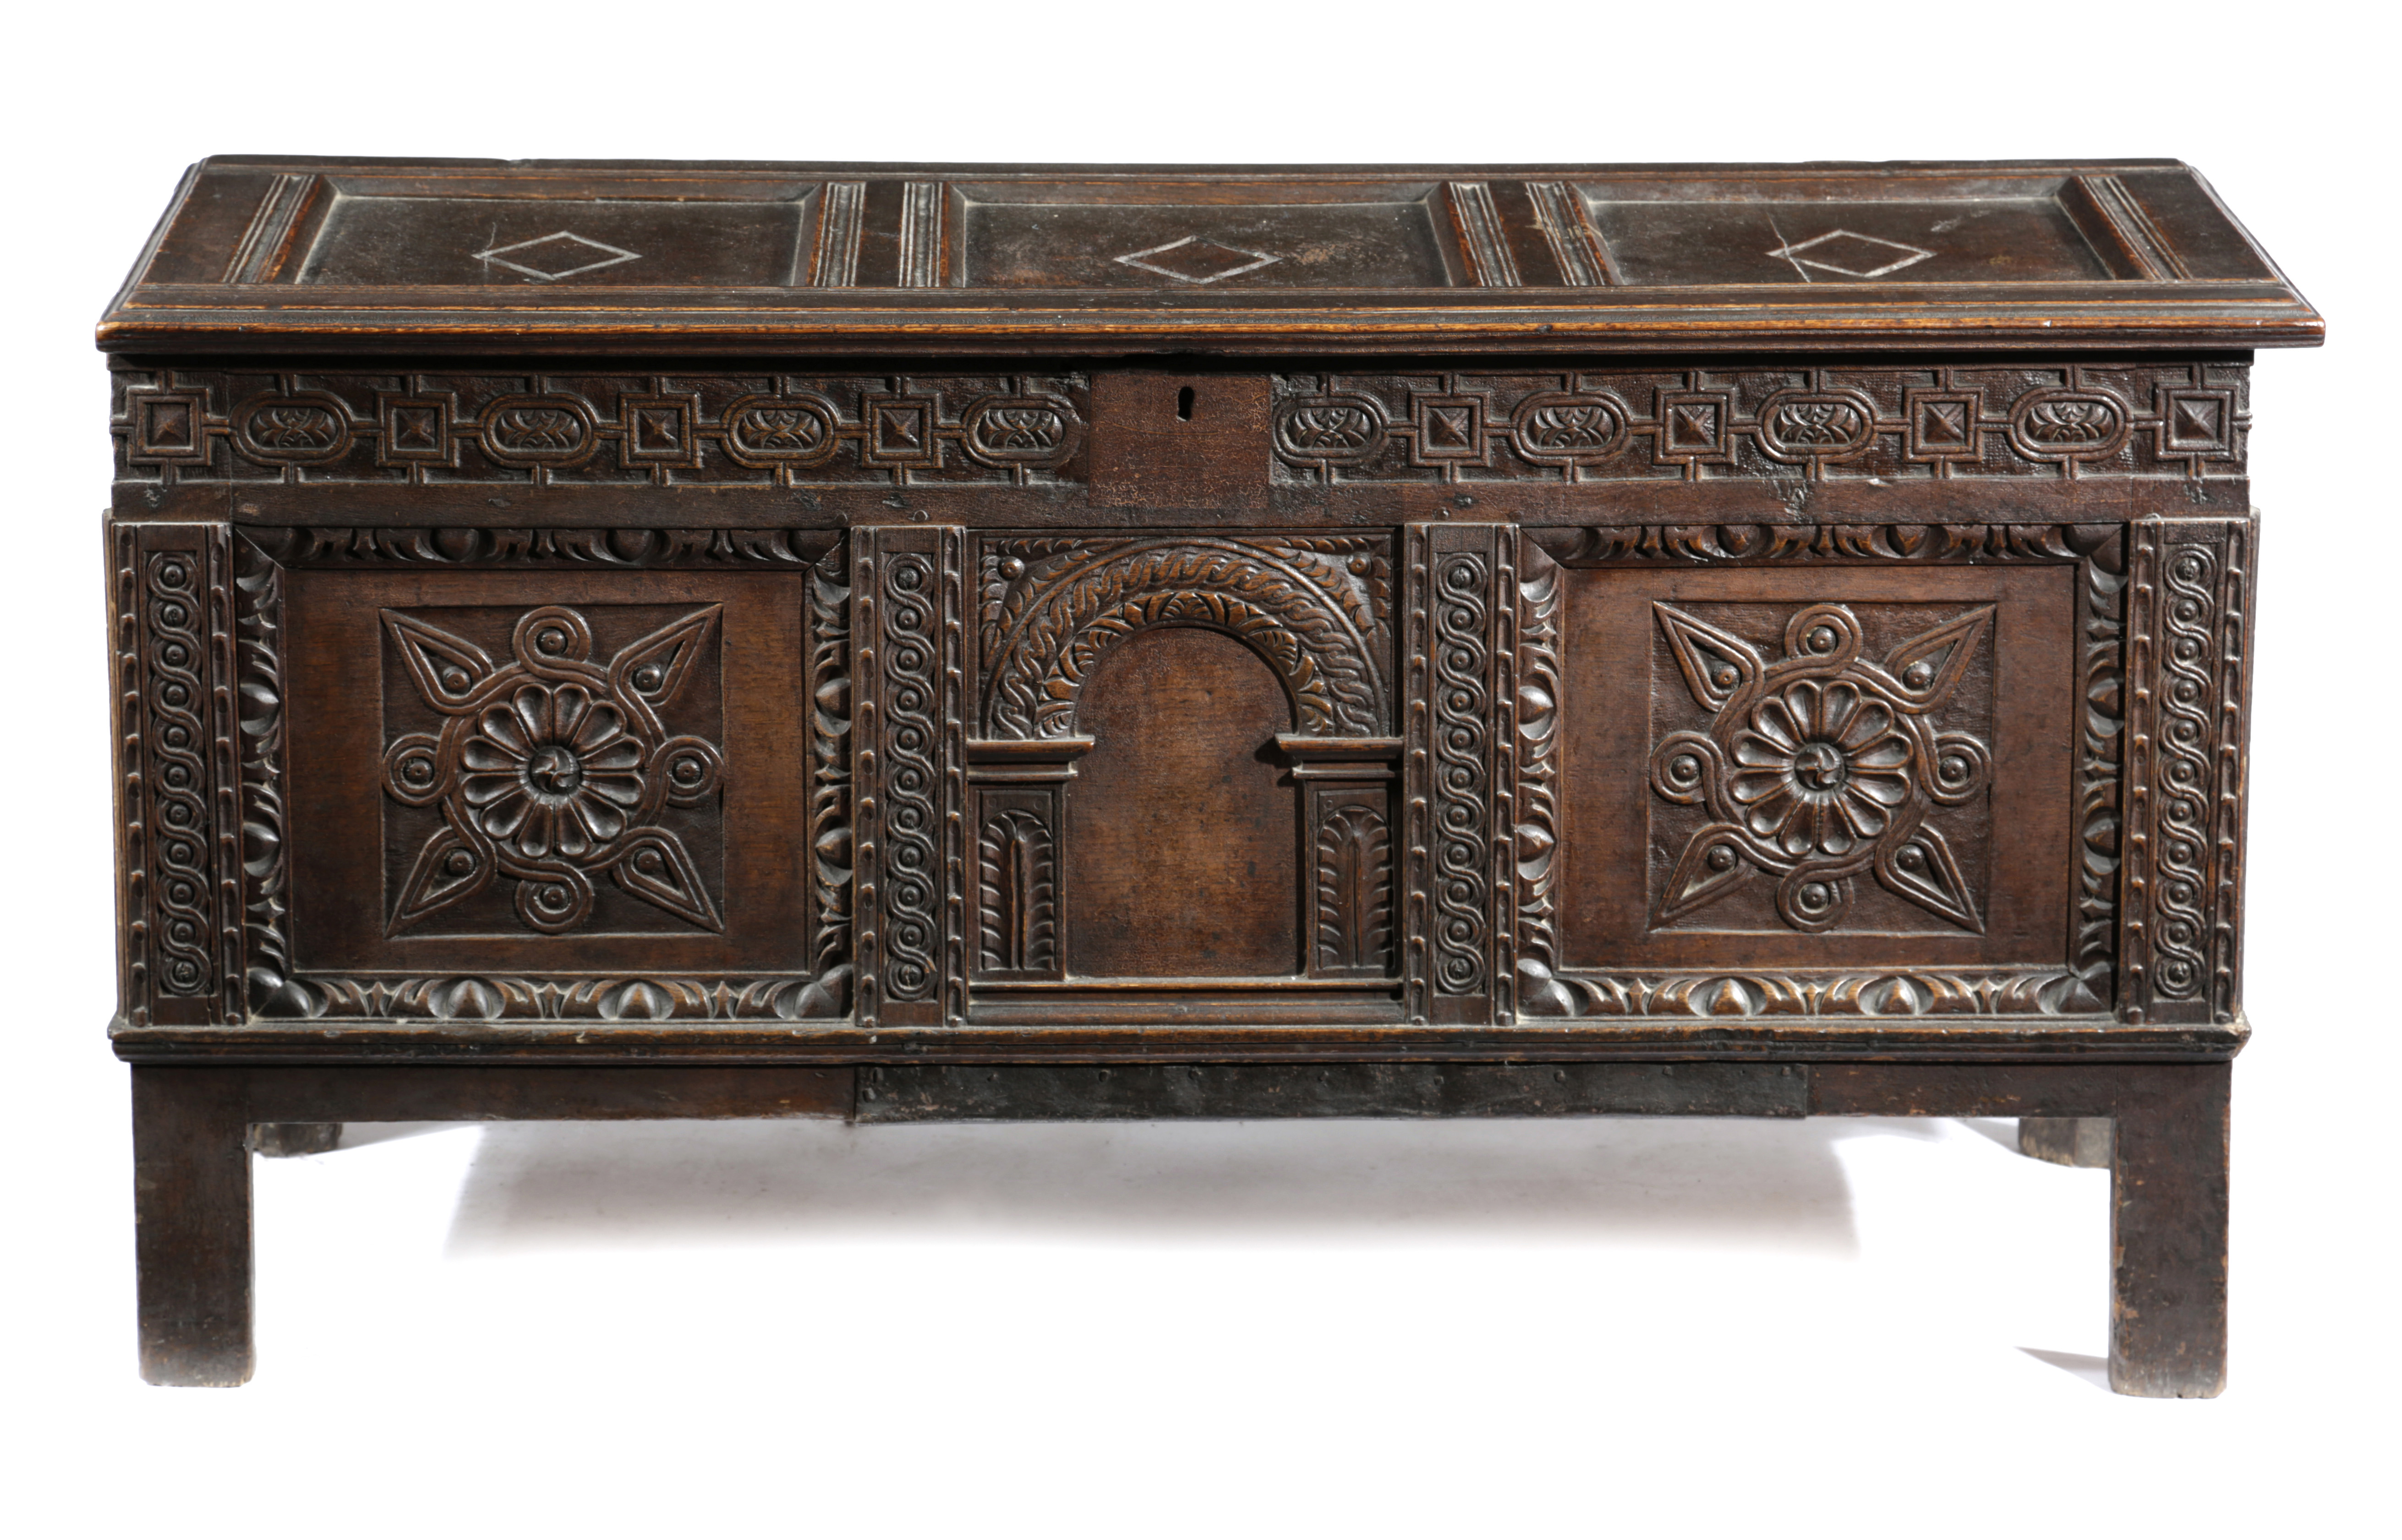 AN OAK COFFER 17TH CENTURY AND LATER with a triple panelled lid above a strapwork frieze, with a